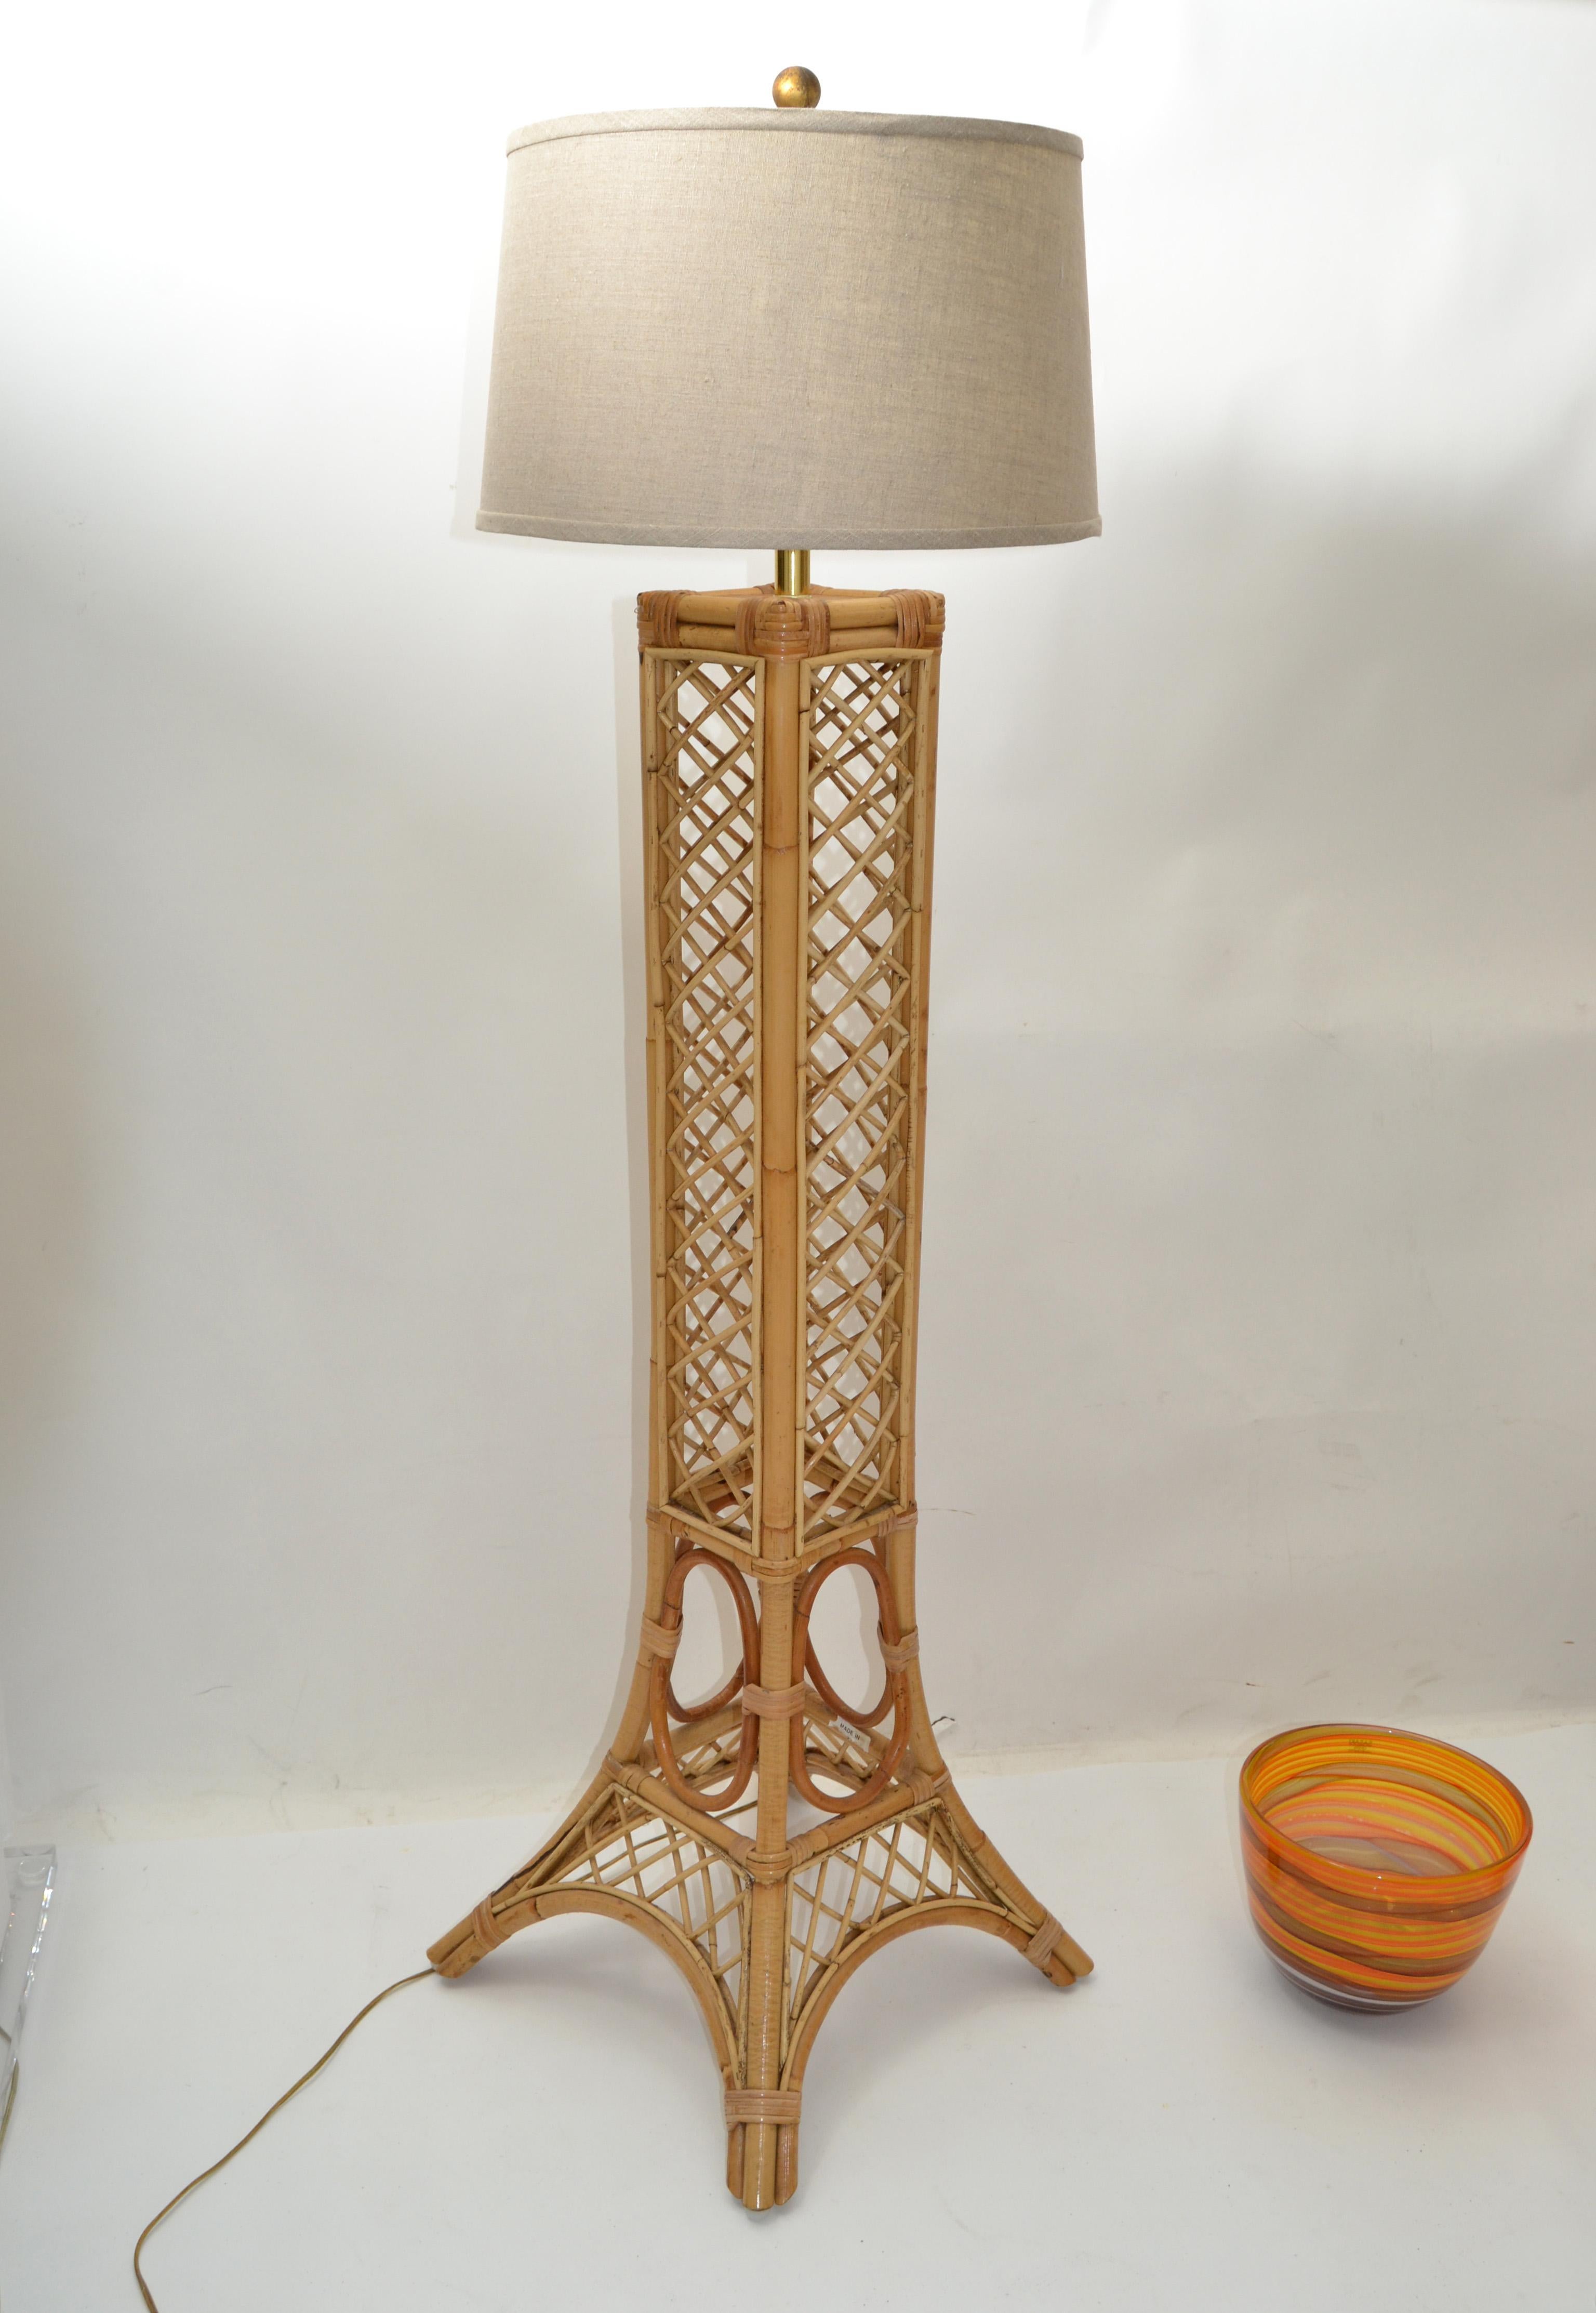 Eiffel Tower Paris Pencil Reed & Bend Bamboo Mid-Century Modern Floor Lamp 1970 For Sale 4